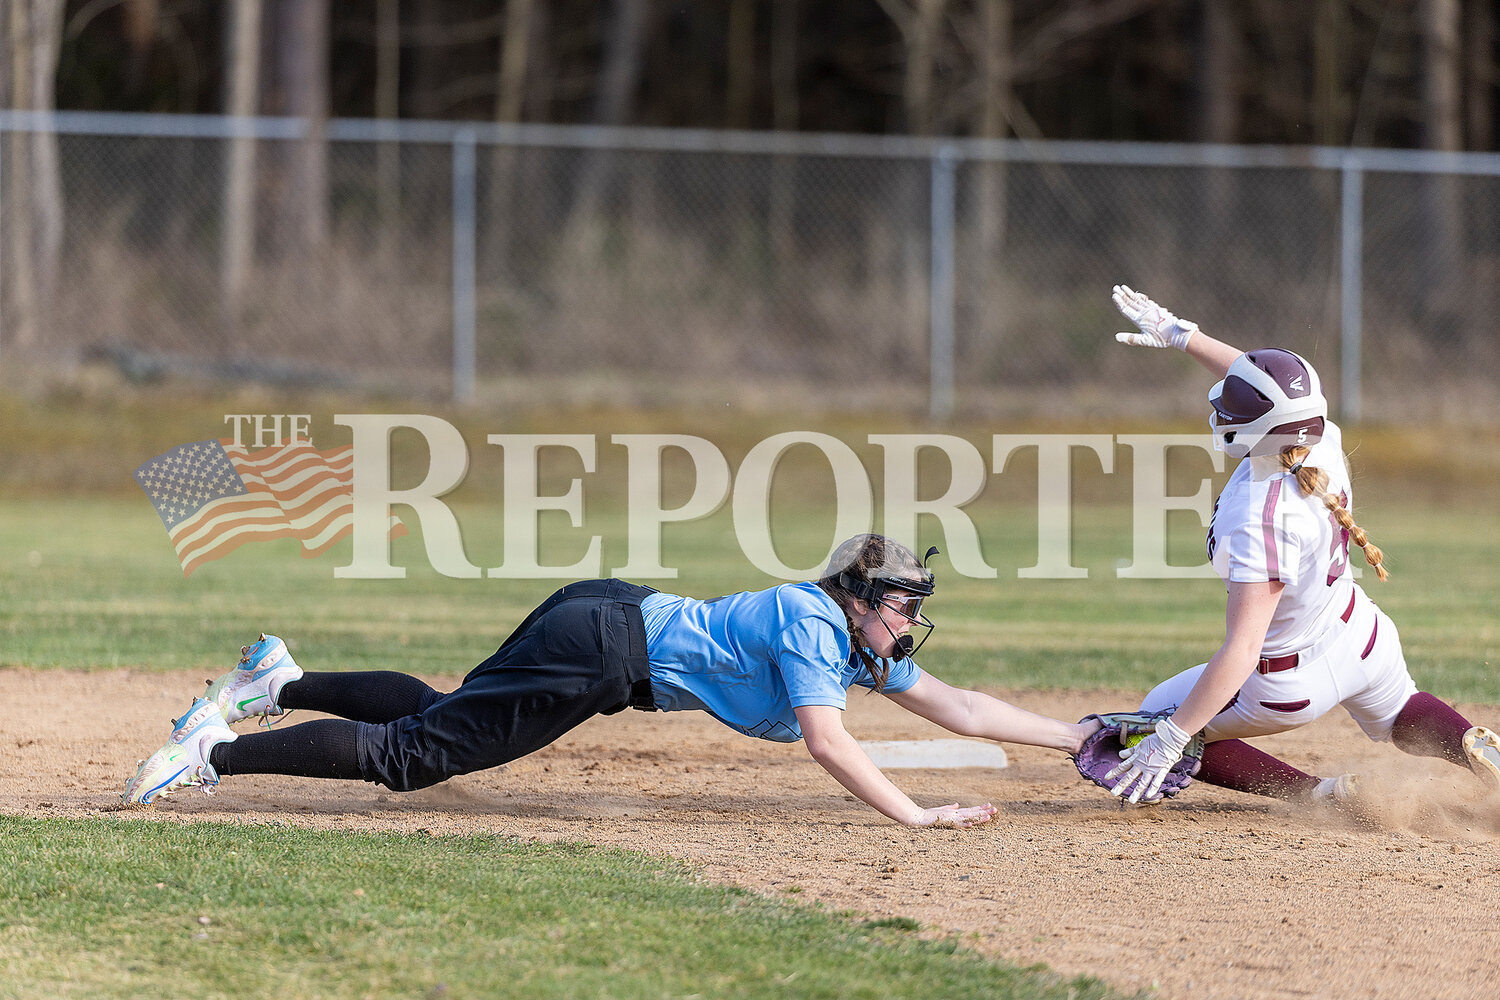 Gilboa-Conesville/Roxbury’s Olivia Ross dives to tag out Charlotte Valley’s Abby Vroman during CVCS’s 9-1 win Tuesday, April 9.